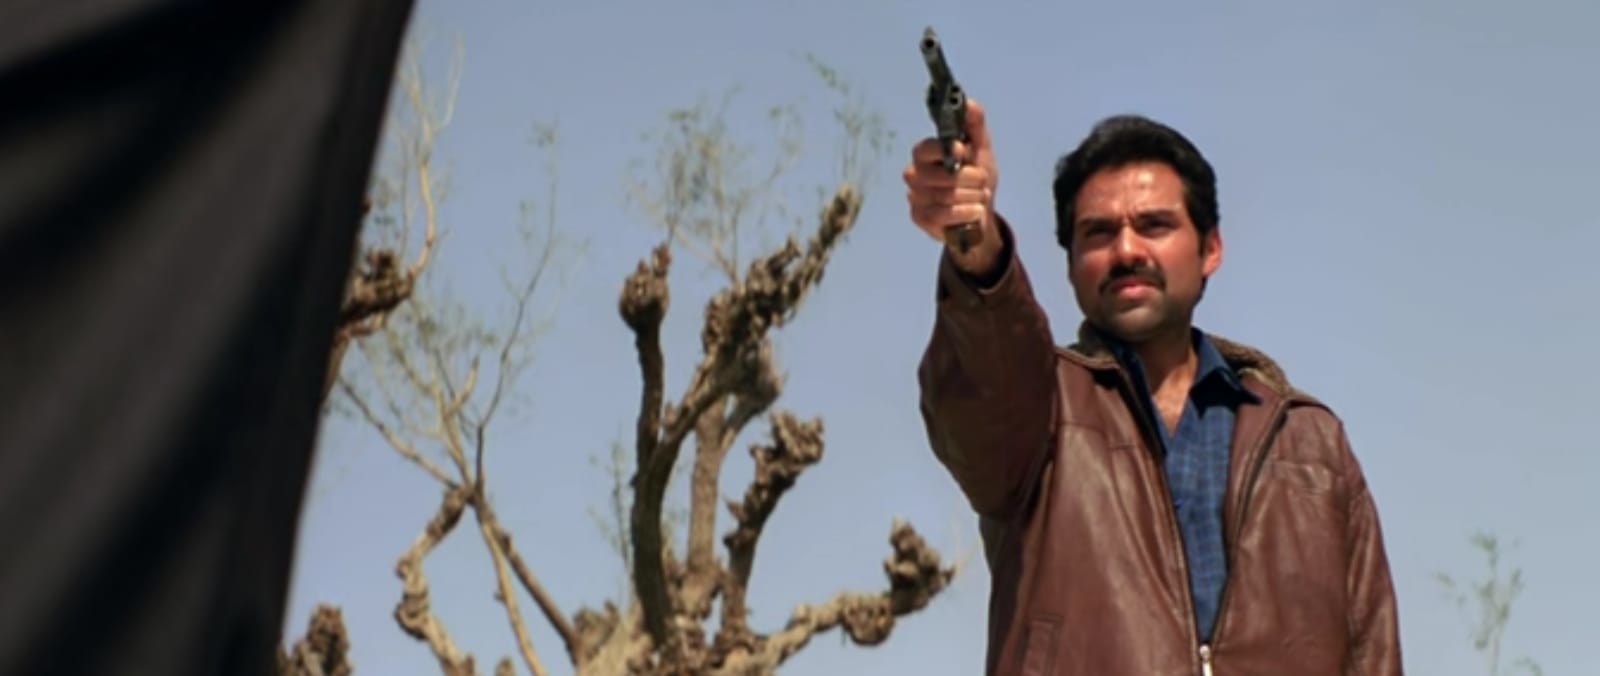 Still of Abhay Deol from the movie